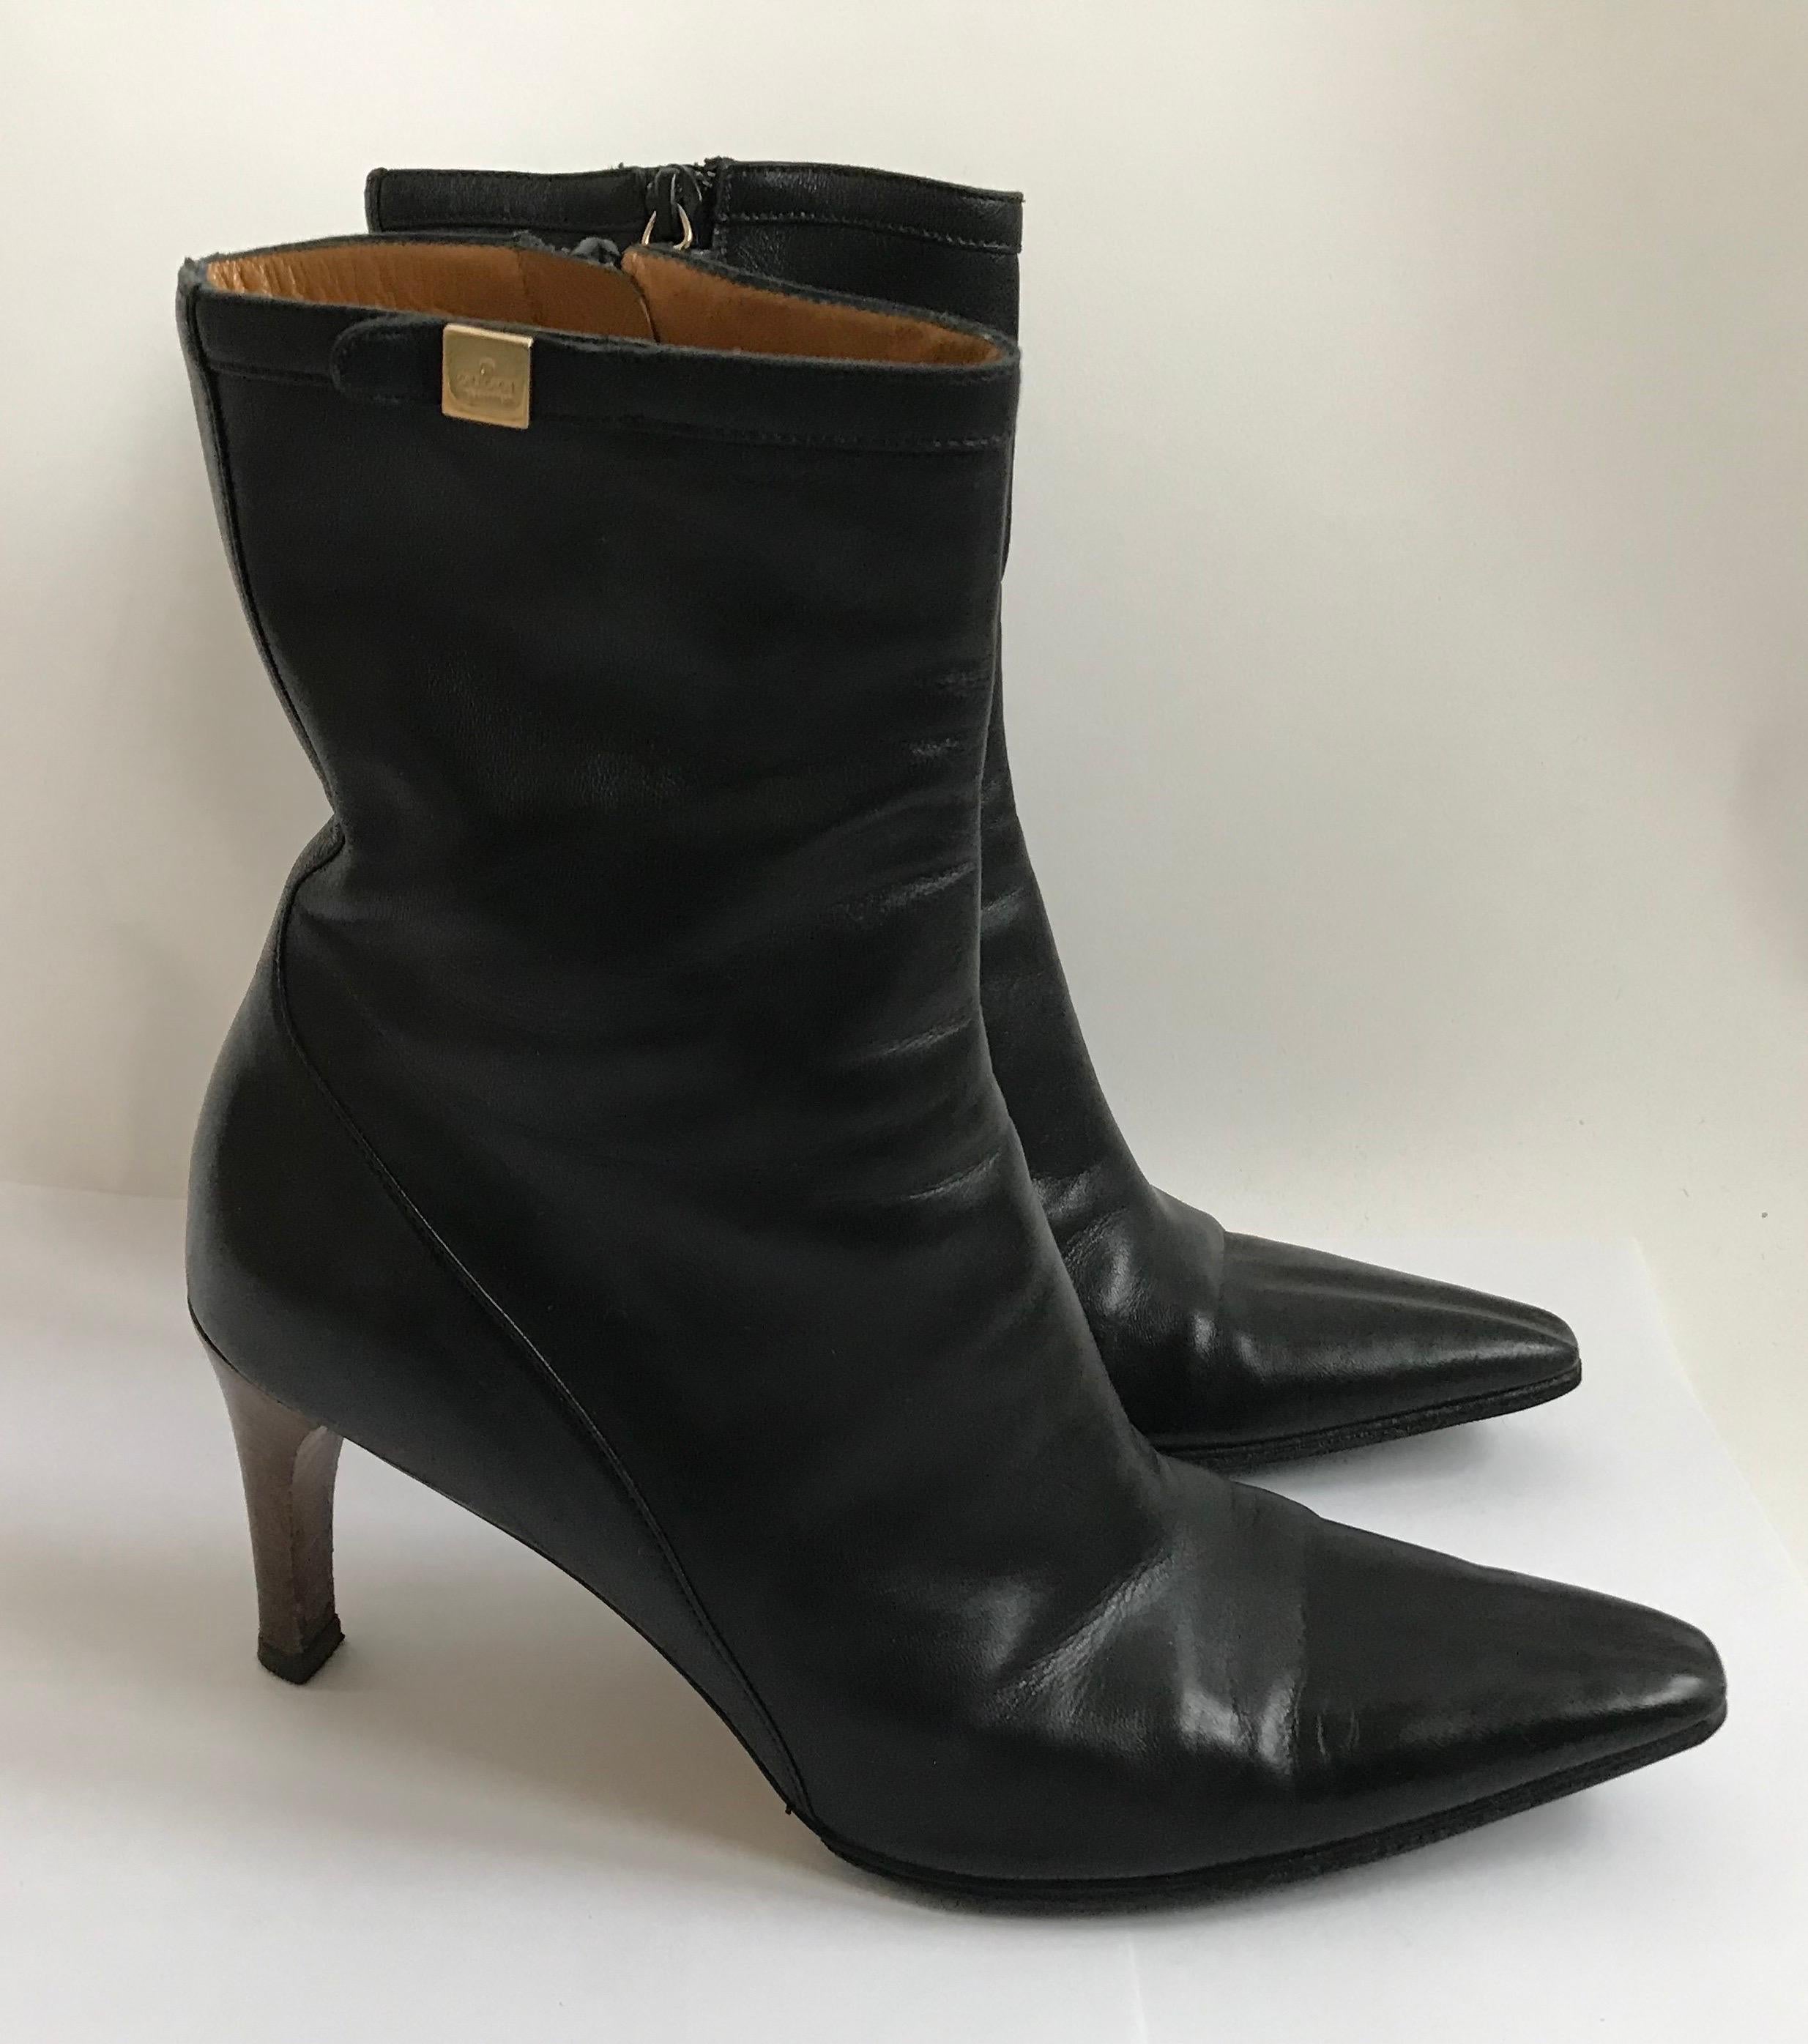 Killer Tom Ford for Gucci ankle boots 
Zip up 
Metal logo plate
Stacked wooden heels
Size 8 
Excellent condition these look as if they were only worn in the store